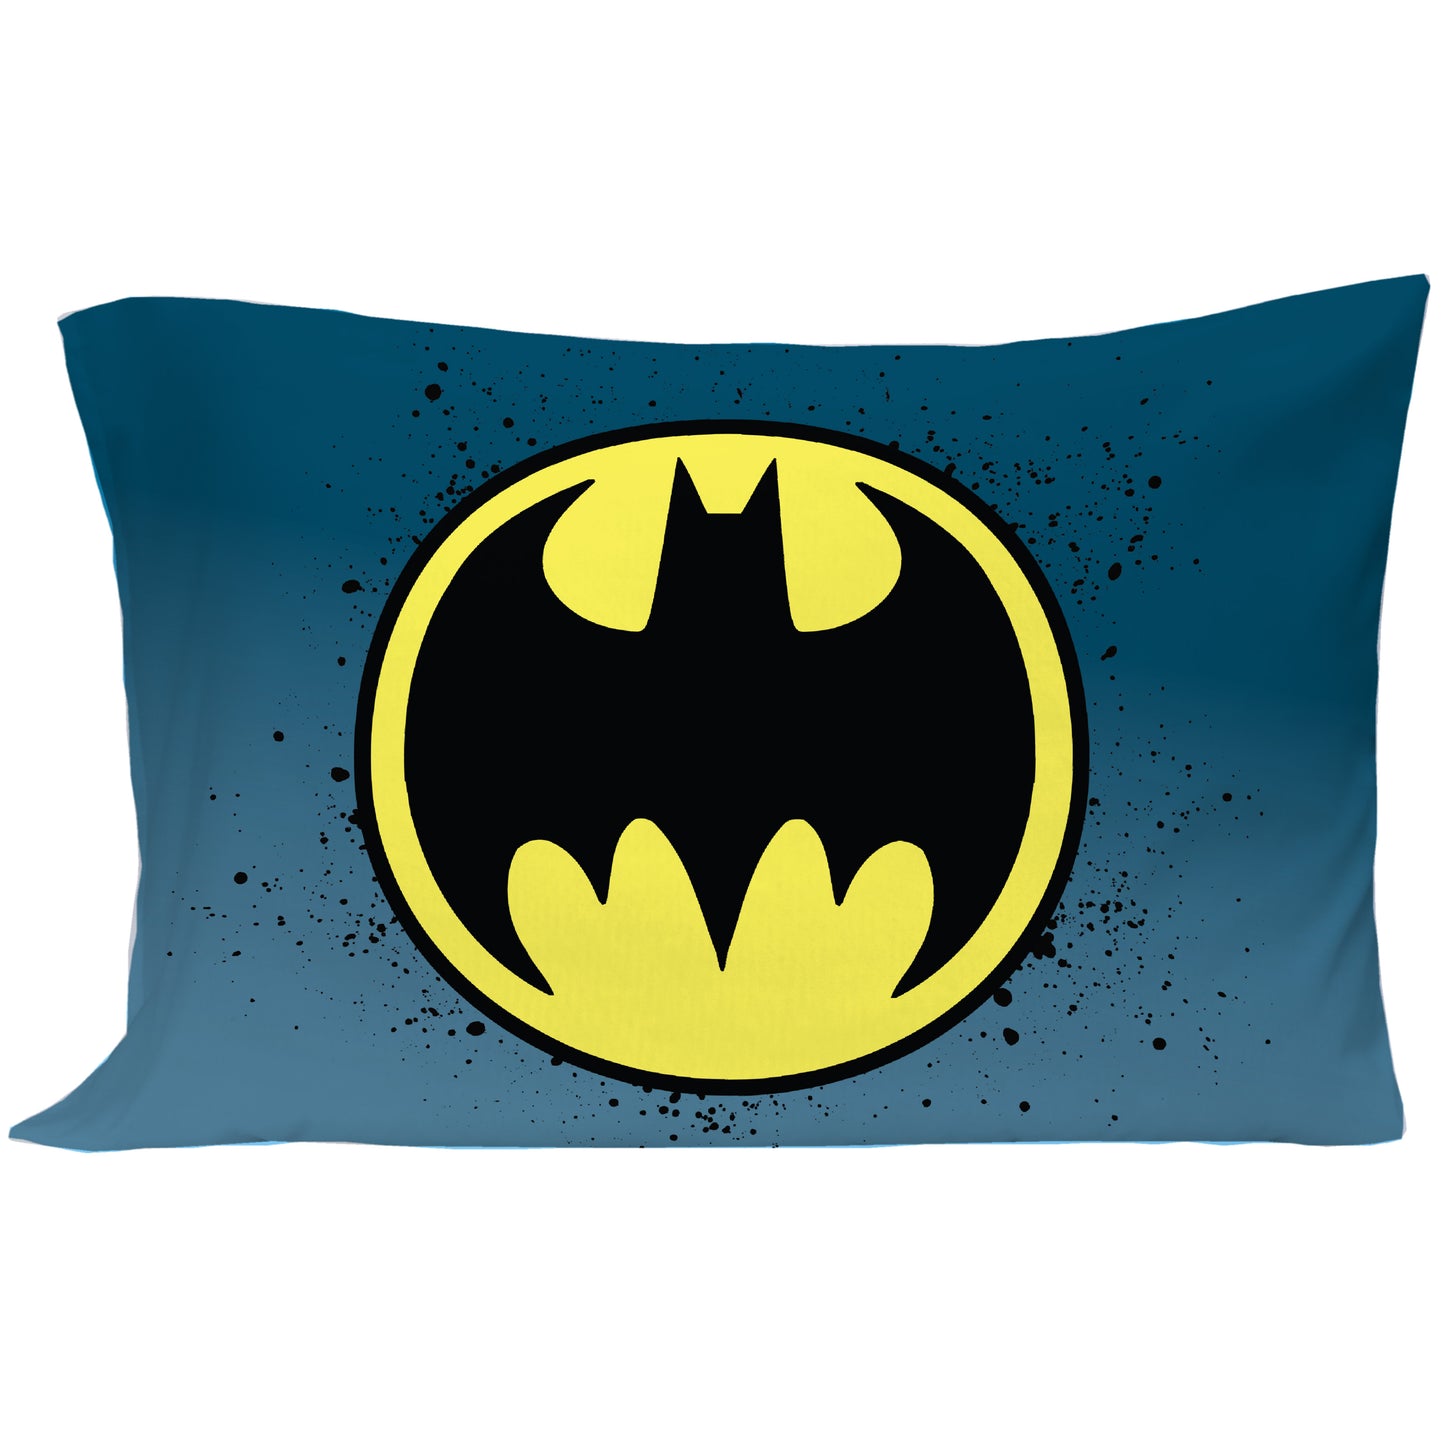 Warner Brothers Batman - Blue Yellow and Grey 4 Piece Toddler Bed Set - Comforter, Flat Top Sheet, Fitted Bottom Sheet, Reversible Pillowcase